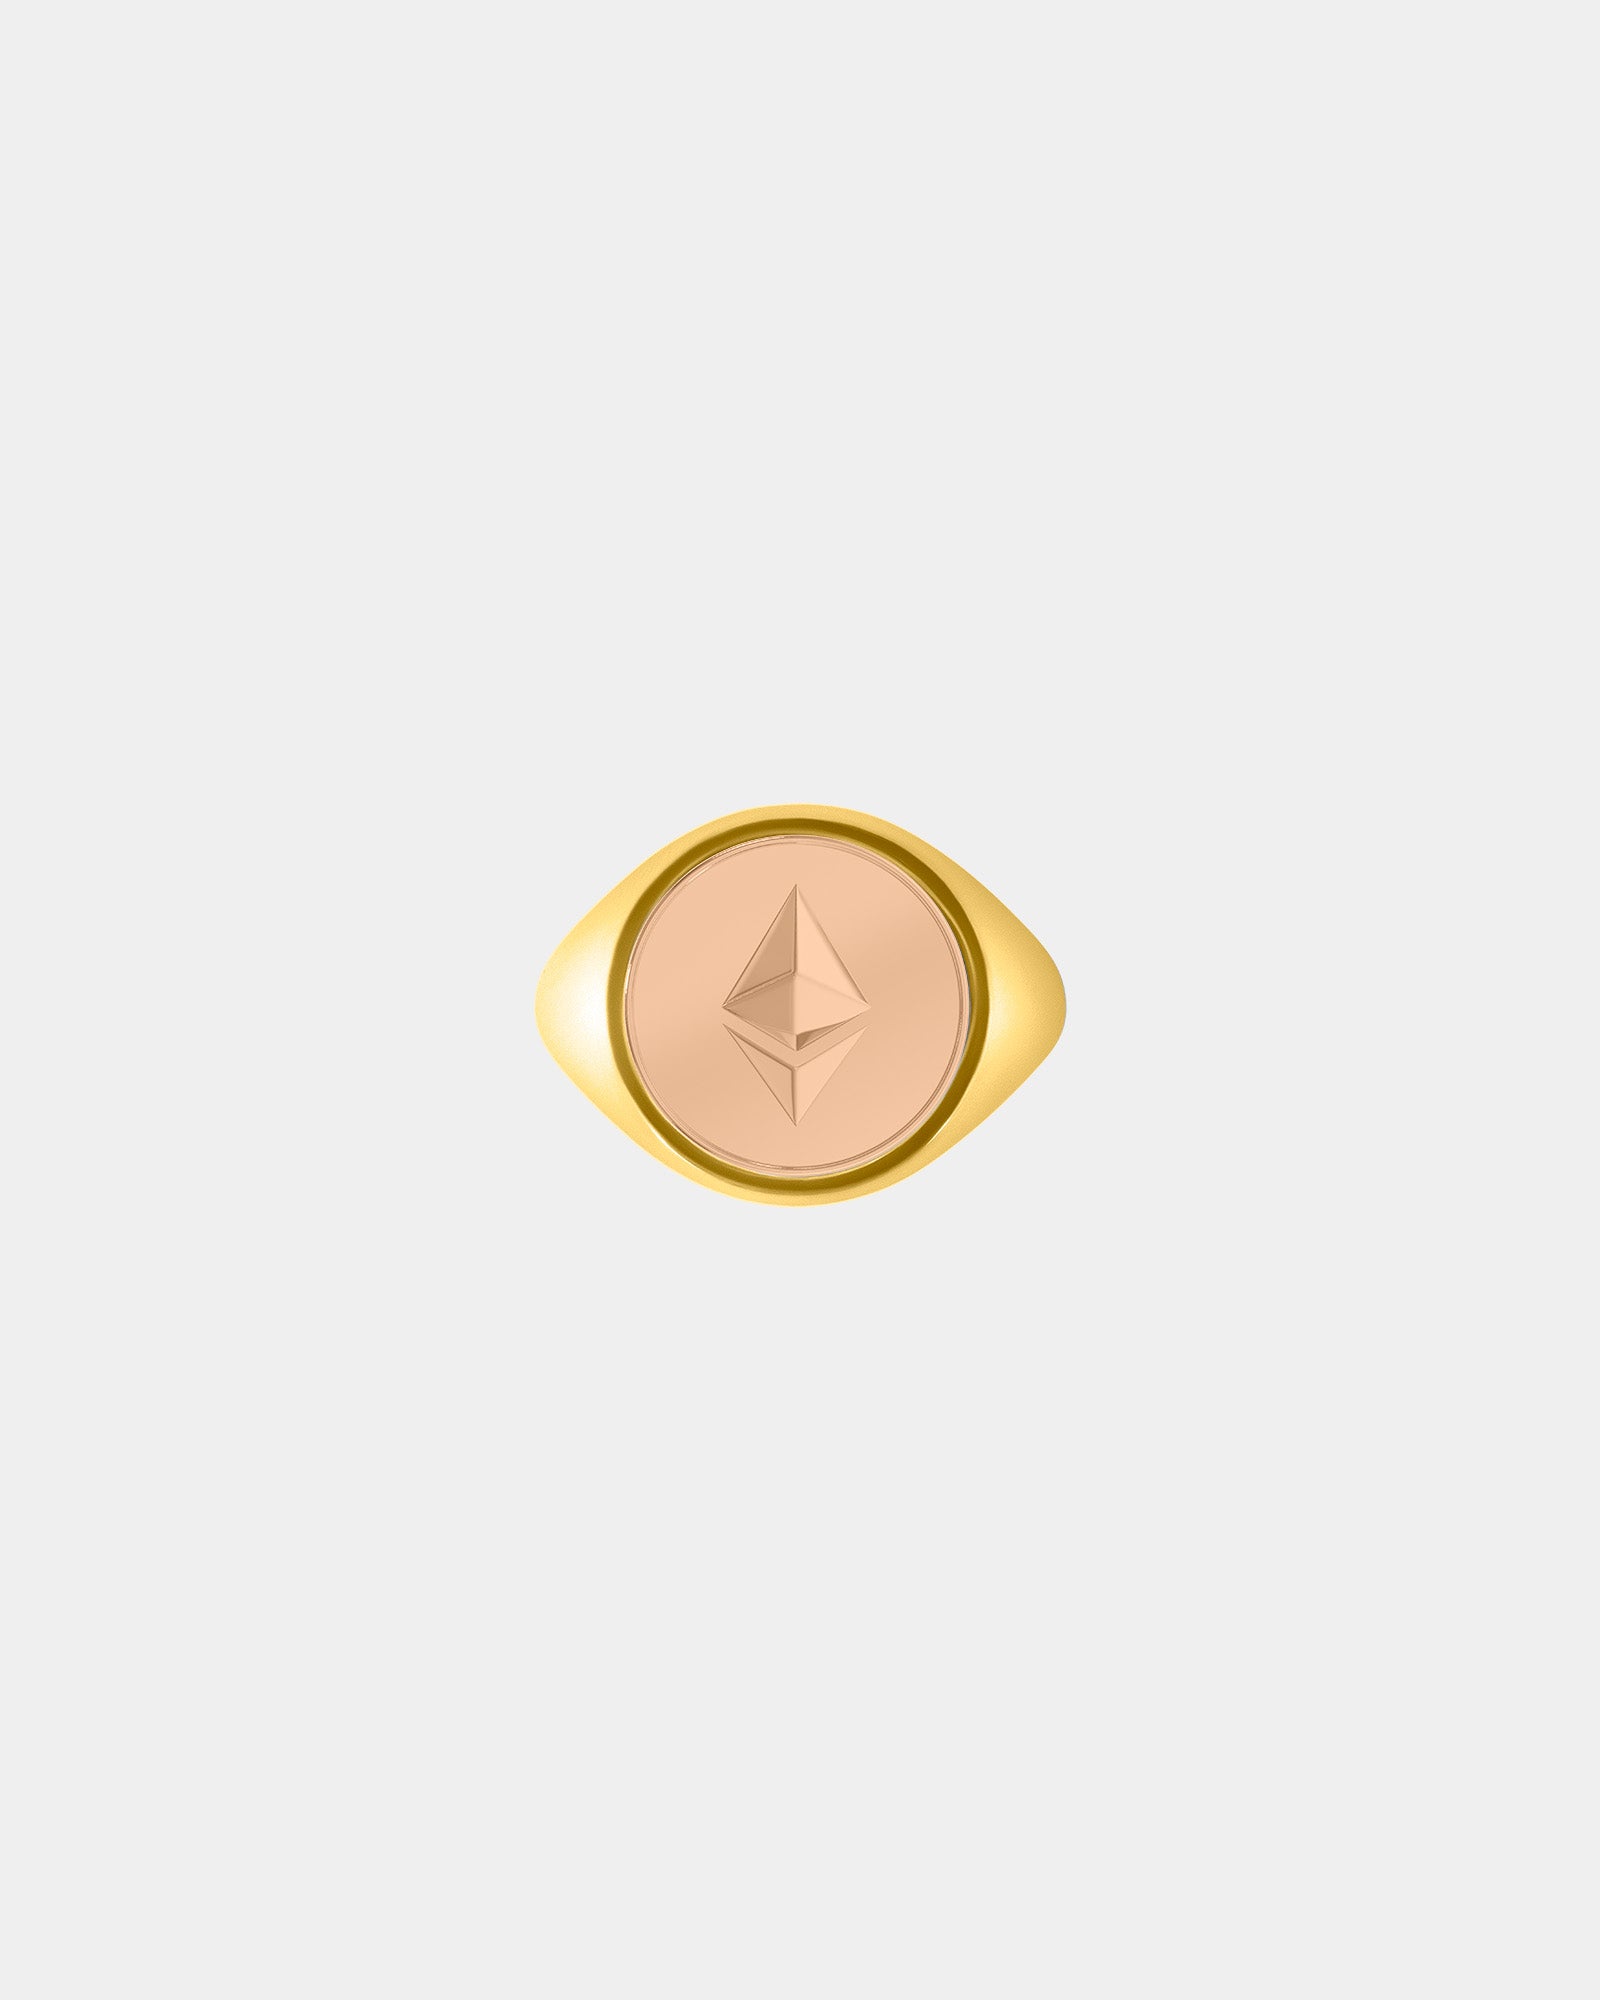 Large Ethereum Crypto Ring in 9k Yellow Gold / 9k Rose Gold by Wilson Grant